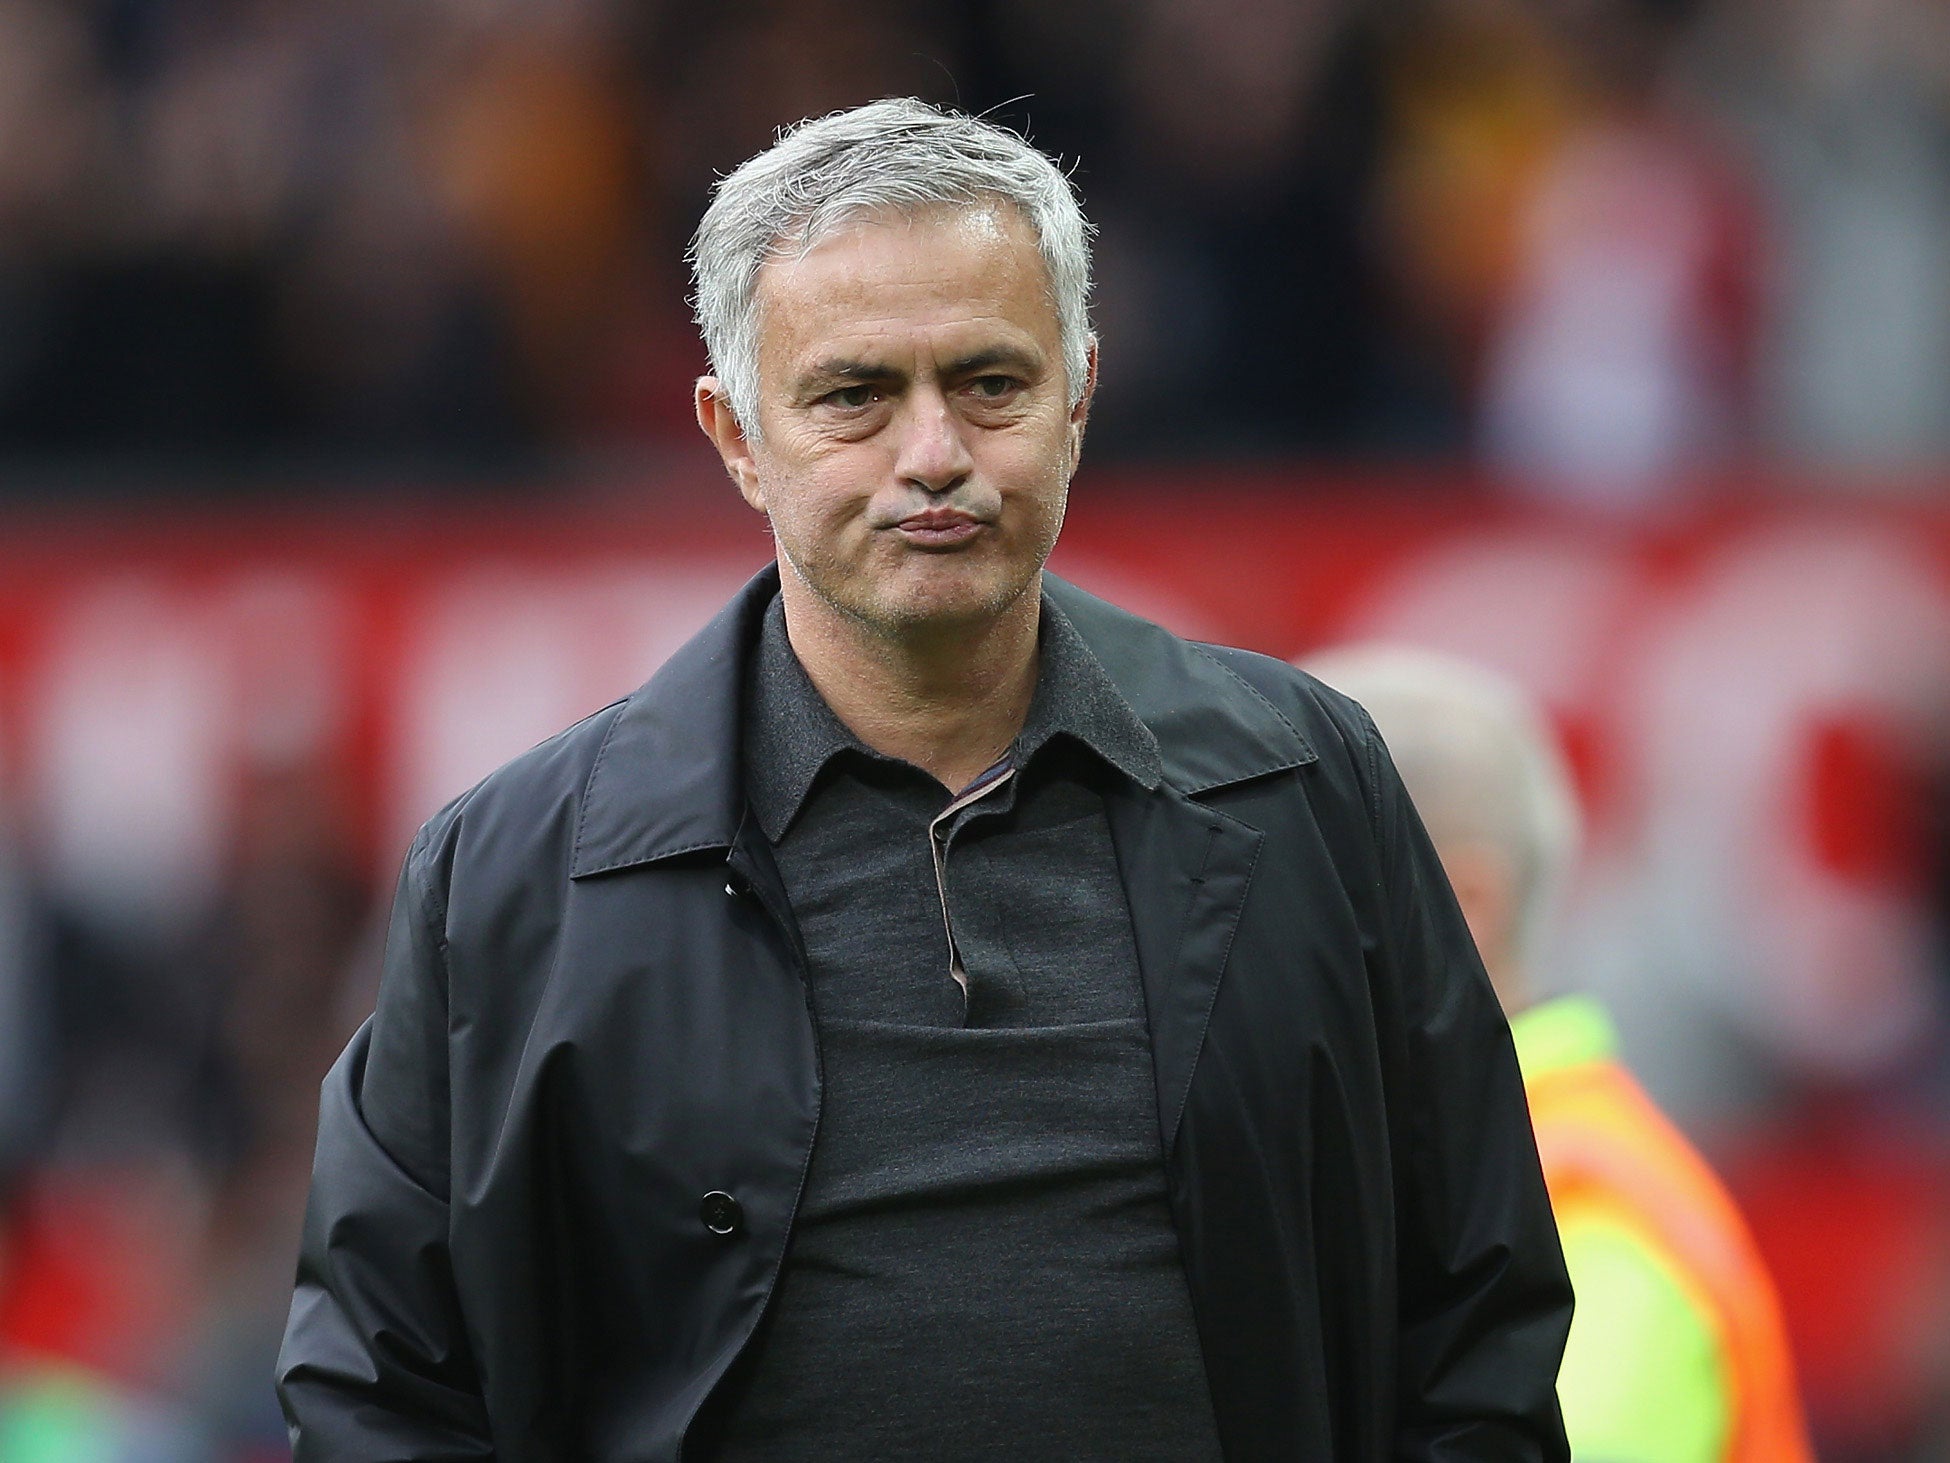 Jose Mourinho was disappointed by with the attitude of his players